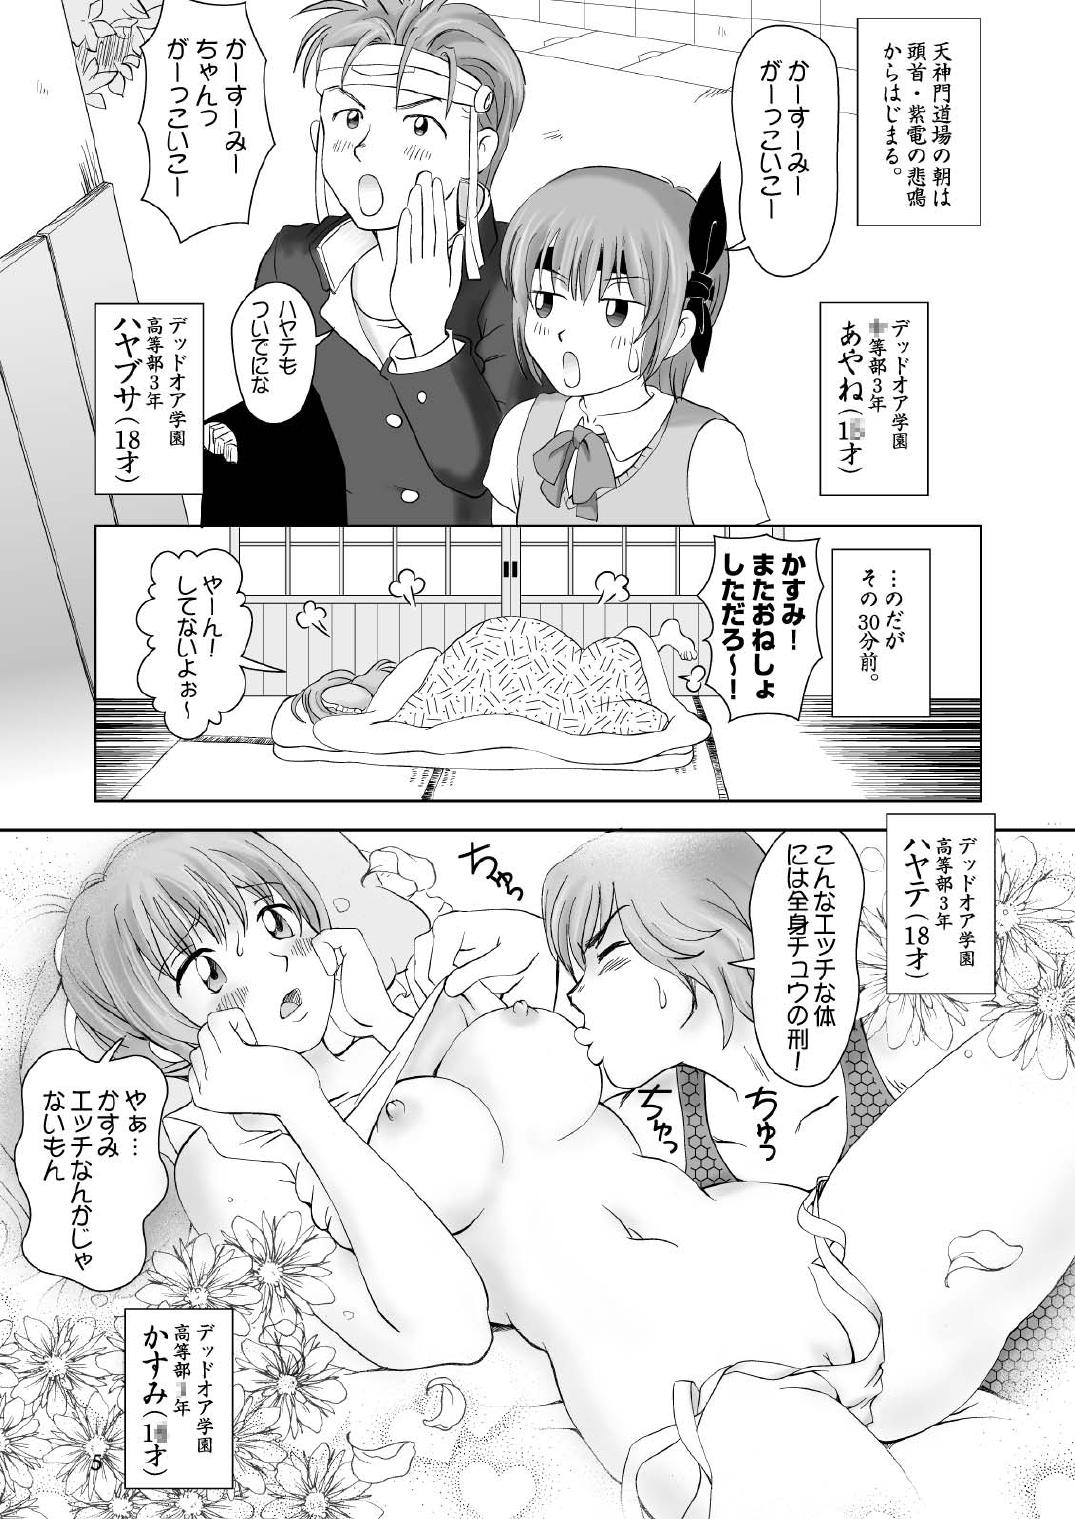 Cheating Wife Sugoiyo!! Kasumi-chan 2 - Dead or alive Cuminmouth - Page 5